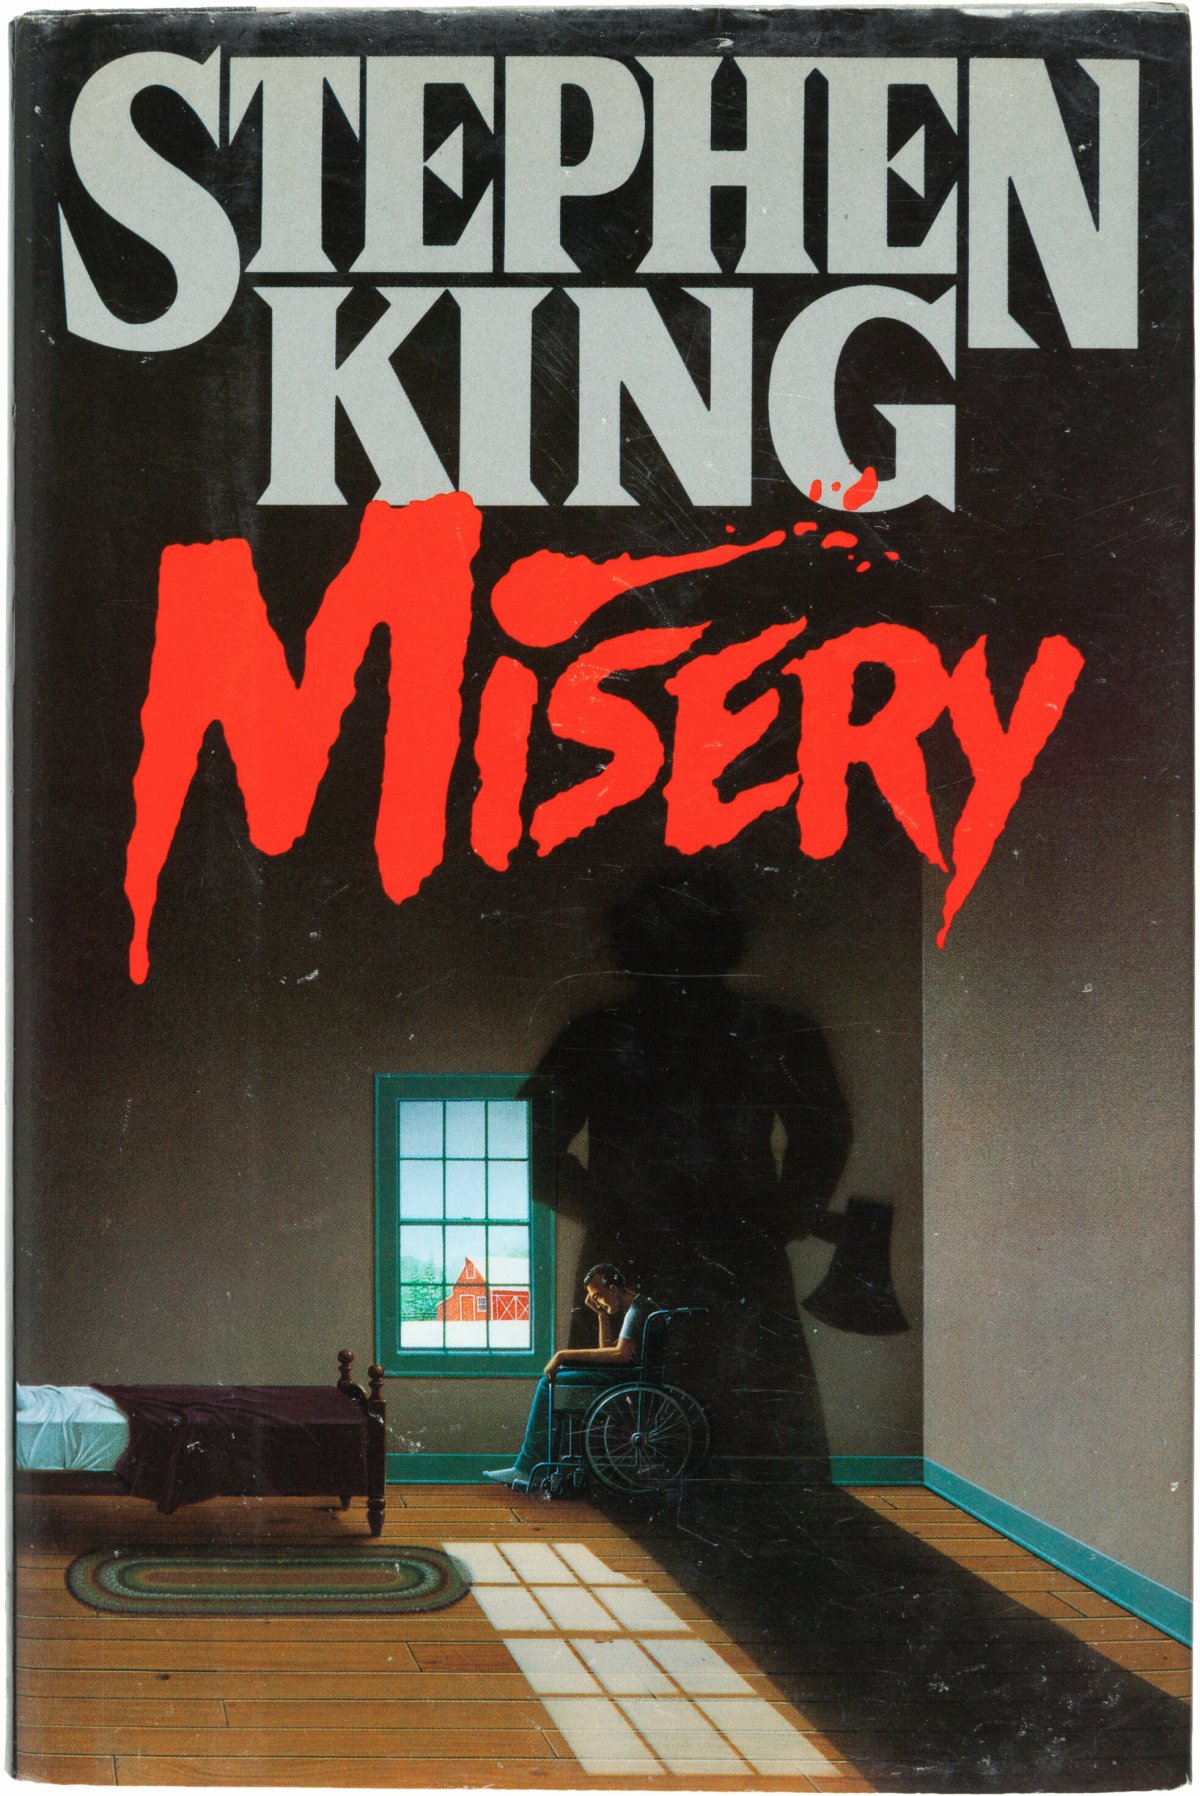 Audiobook review – “Misery” by Stephen King